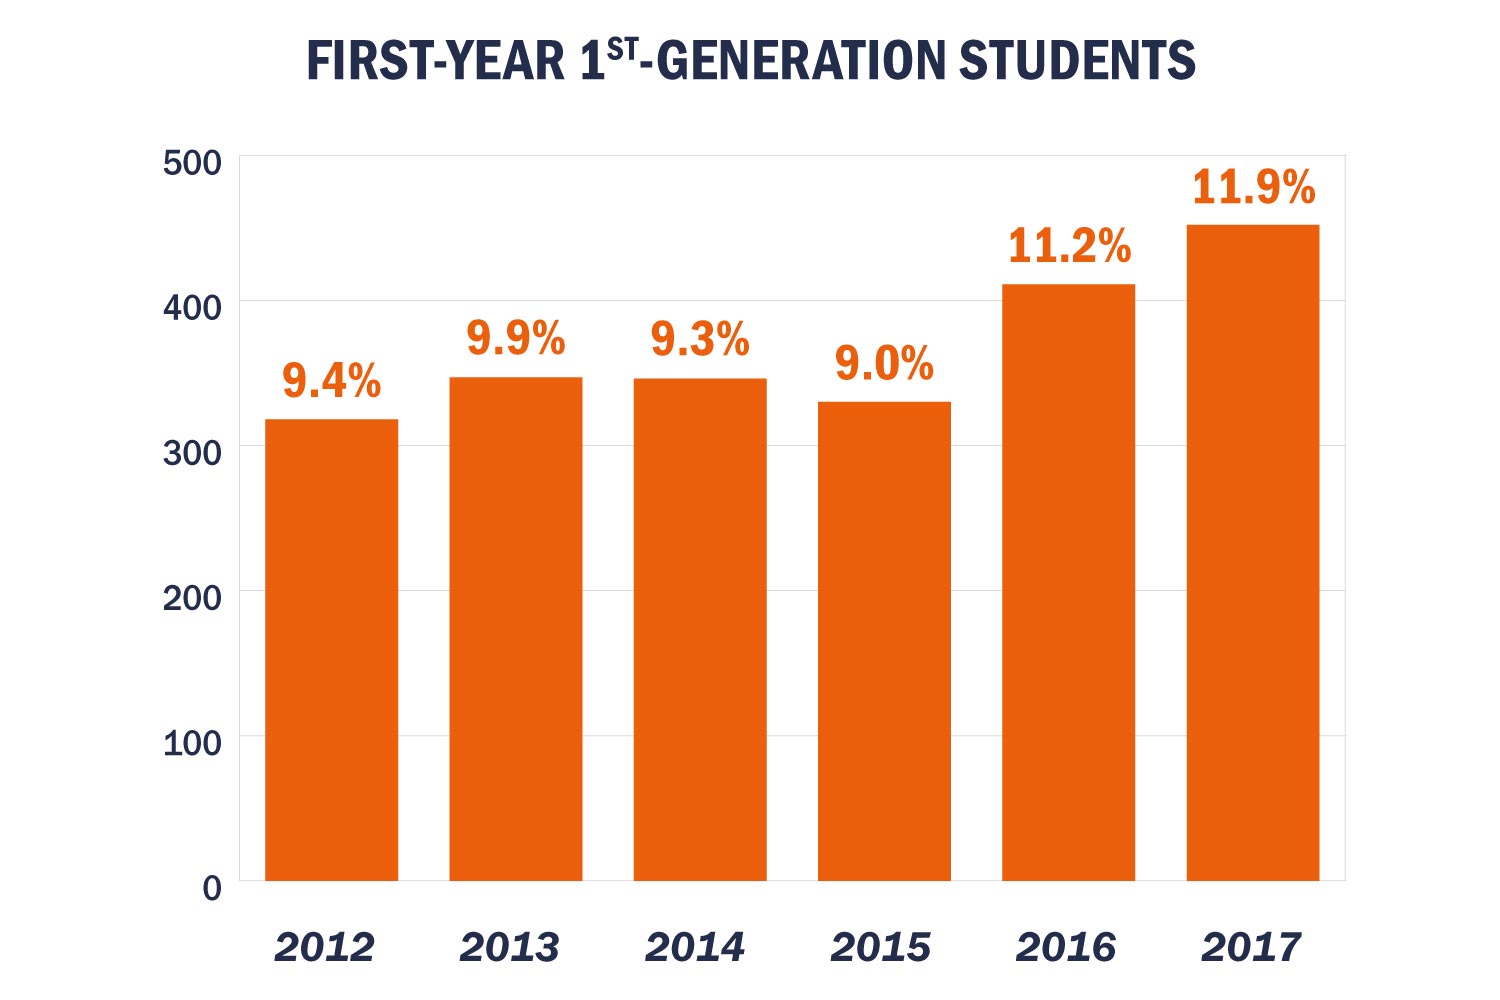 First-Year Generation Students graph by year.  2012: 9.4% 2013: 9.9% 2014: 9.3% 2015 9.0% 2016: 11.2% 2017: 11.9%